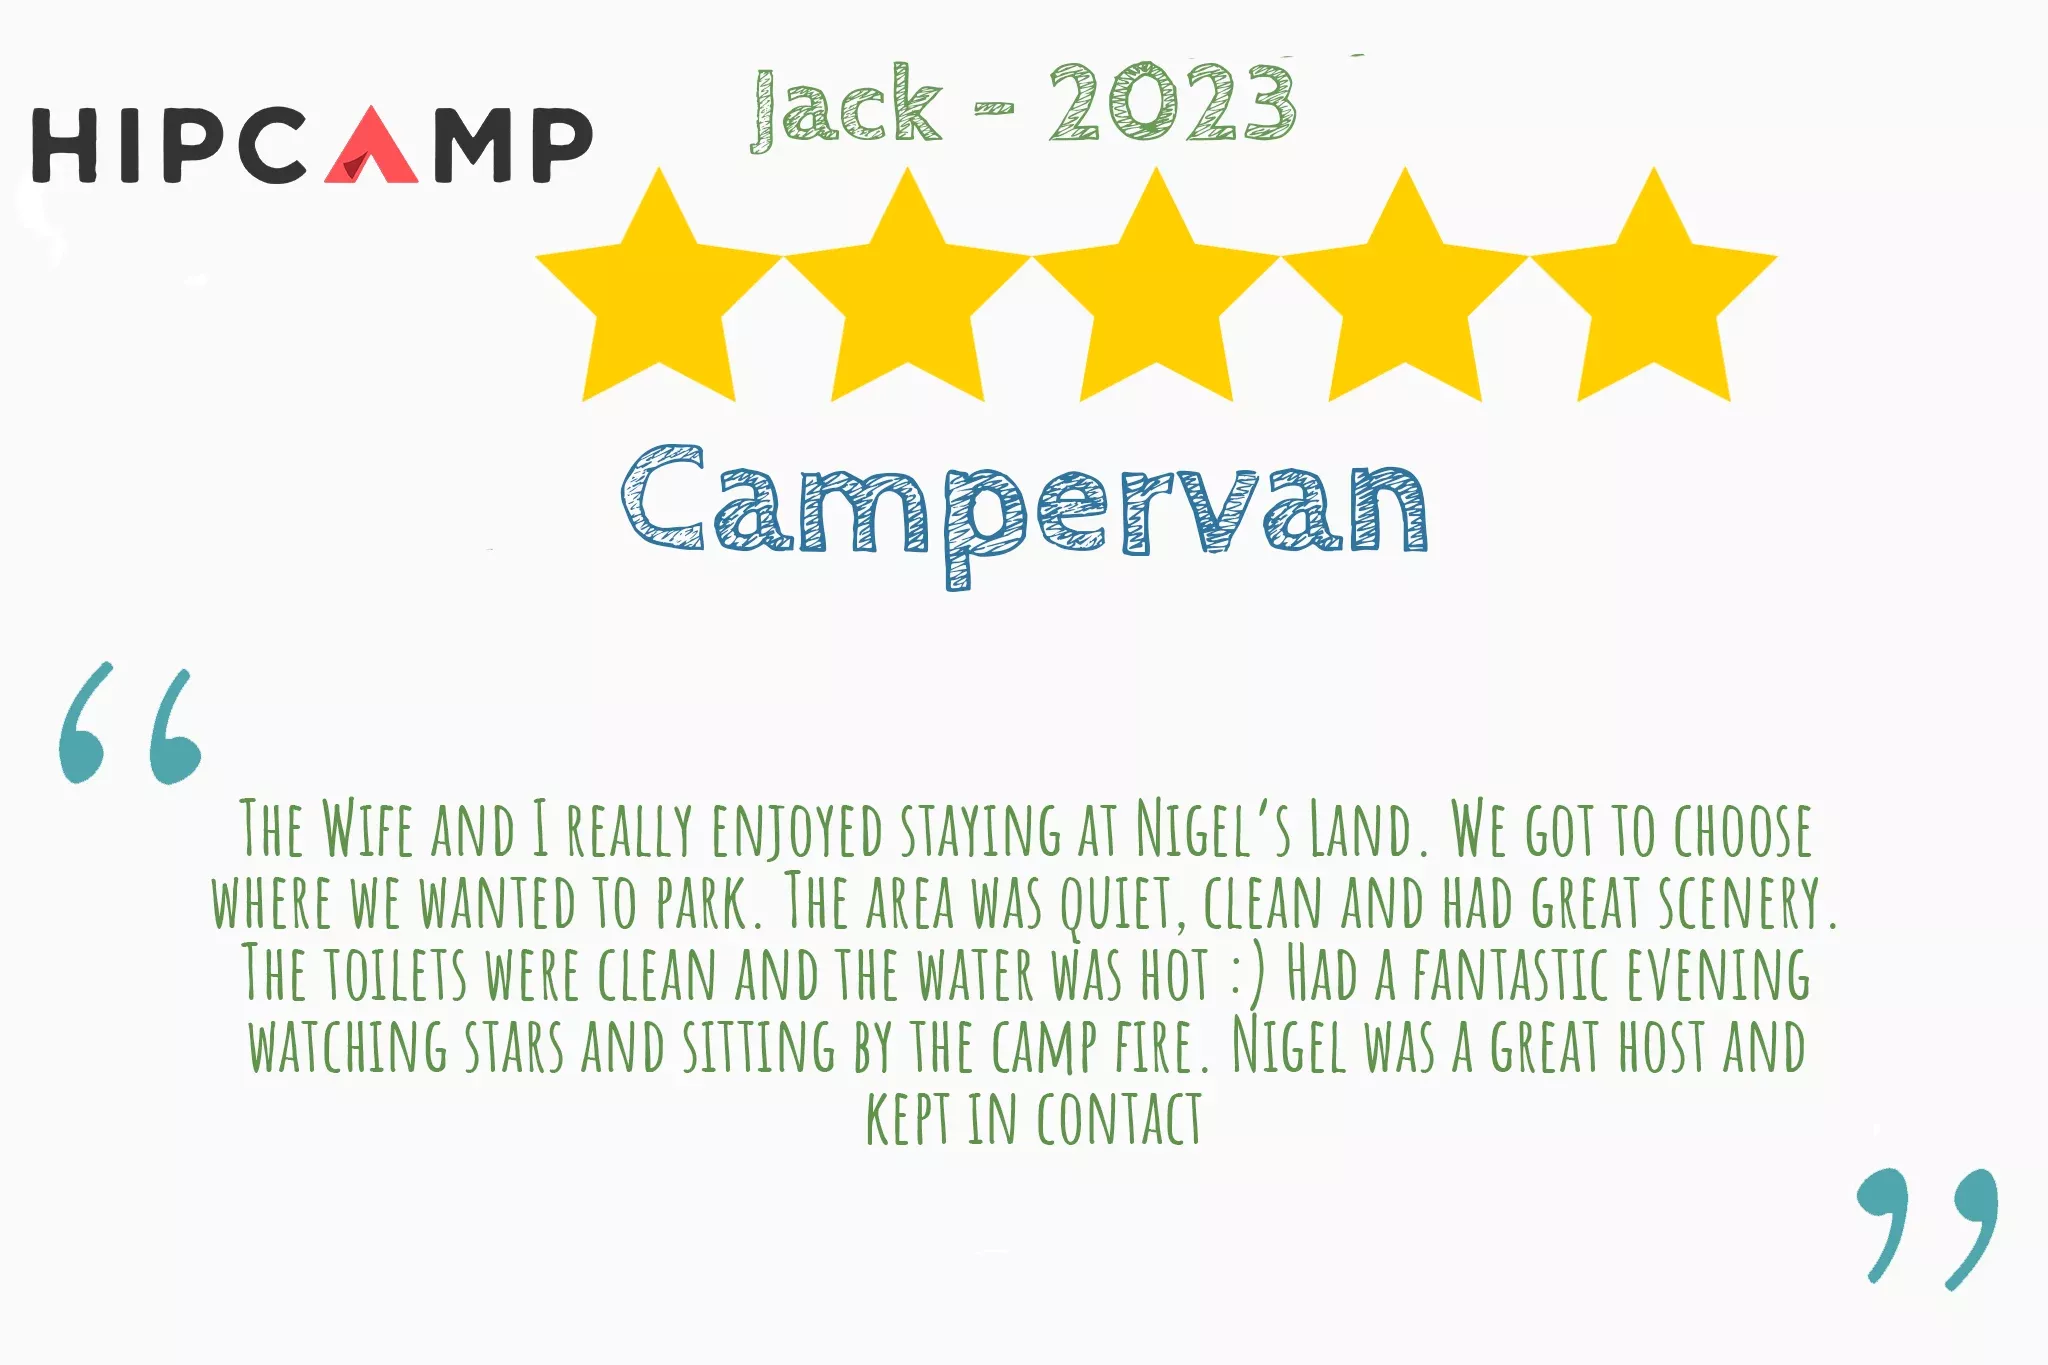 5 star Hipcamp review from Jack that says "The Wife and I really enjoyed staying at Nigel’s Land. We got to choose  where we wanted to park. The area was quiet, clean and had great scenery.  The toilets were clean and the water was hot :) Had a fantastic evening  watching stars and sitting by the camp fire. Nigel was a great host and  kept in contact"